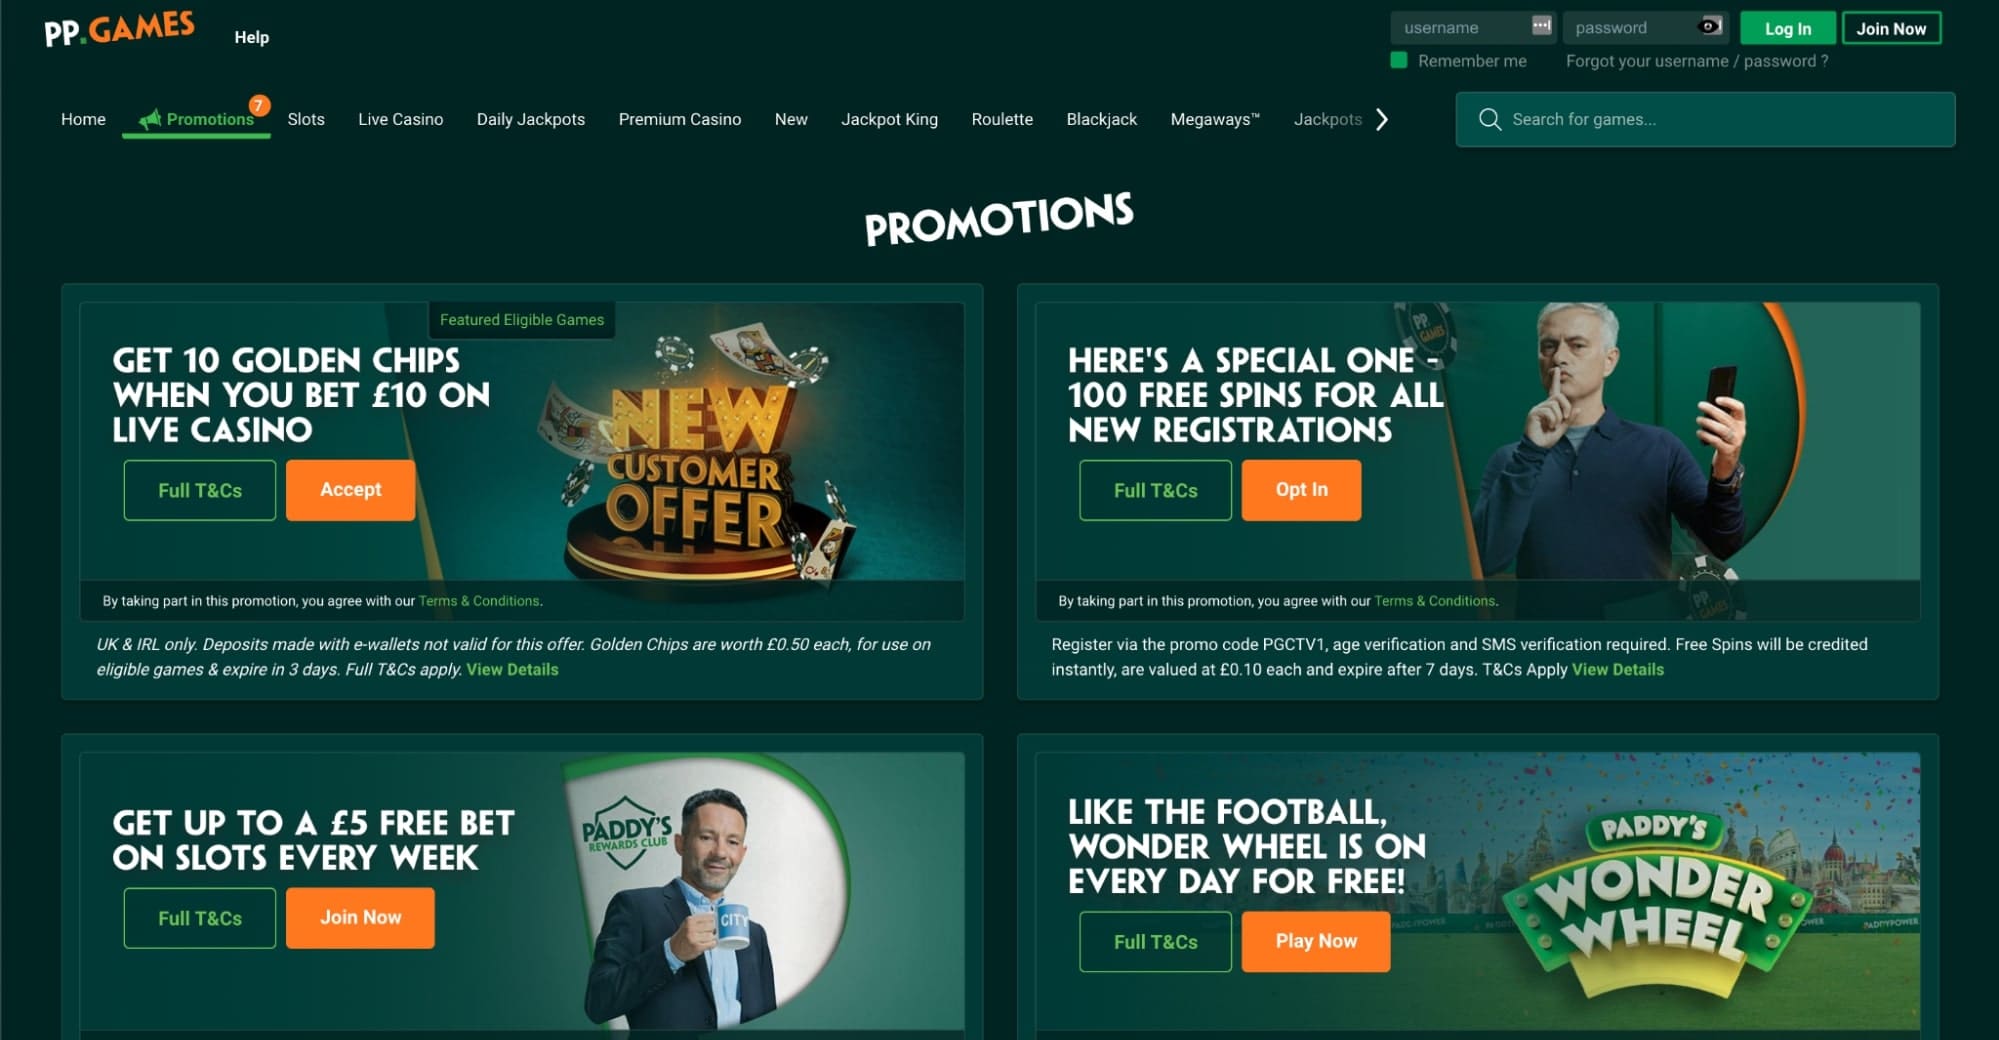 paddy power casino welcome offer